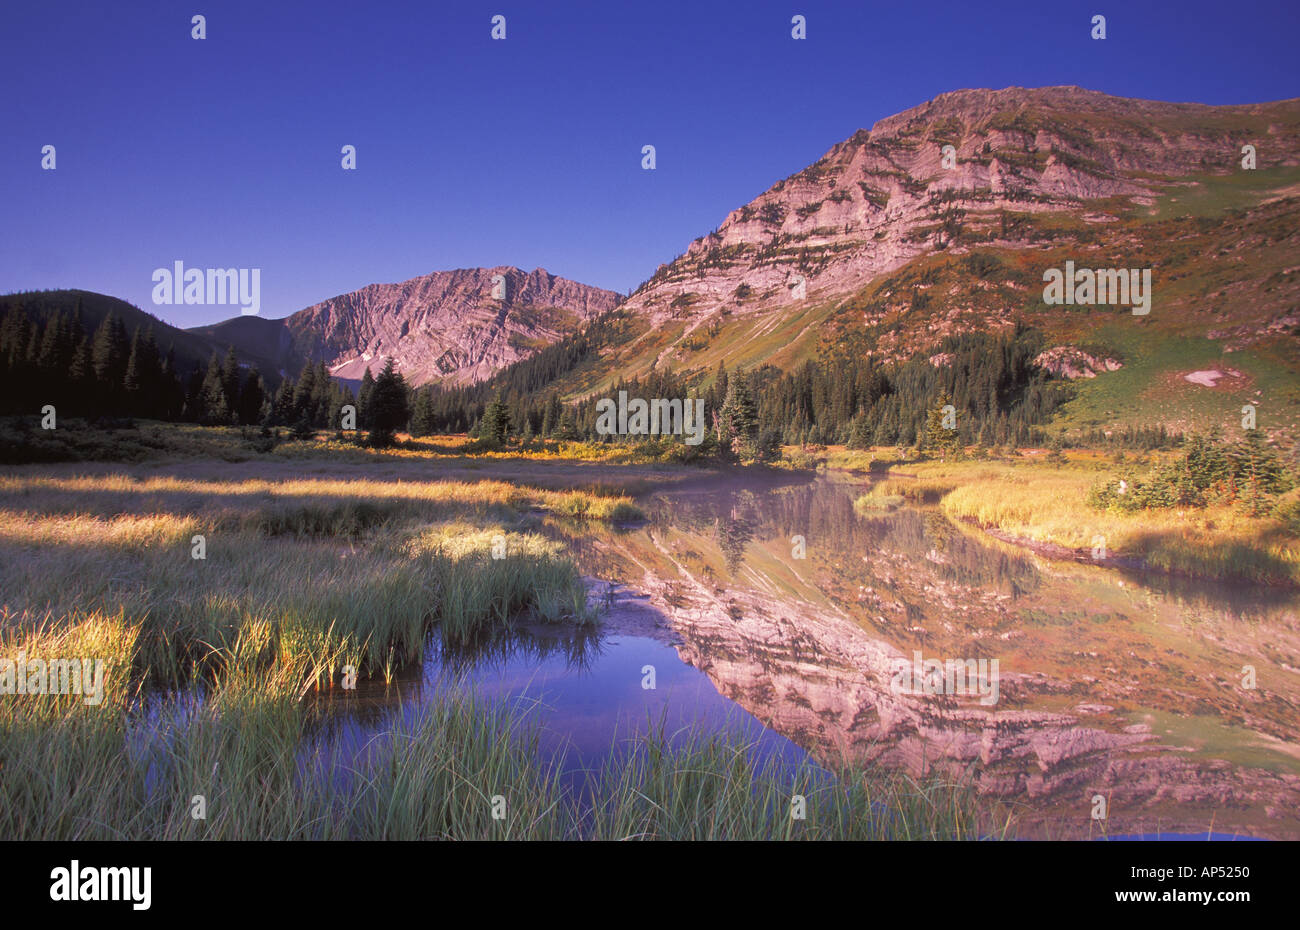 Small reed-filled lake surrounded by mountains Stock Photo